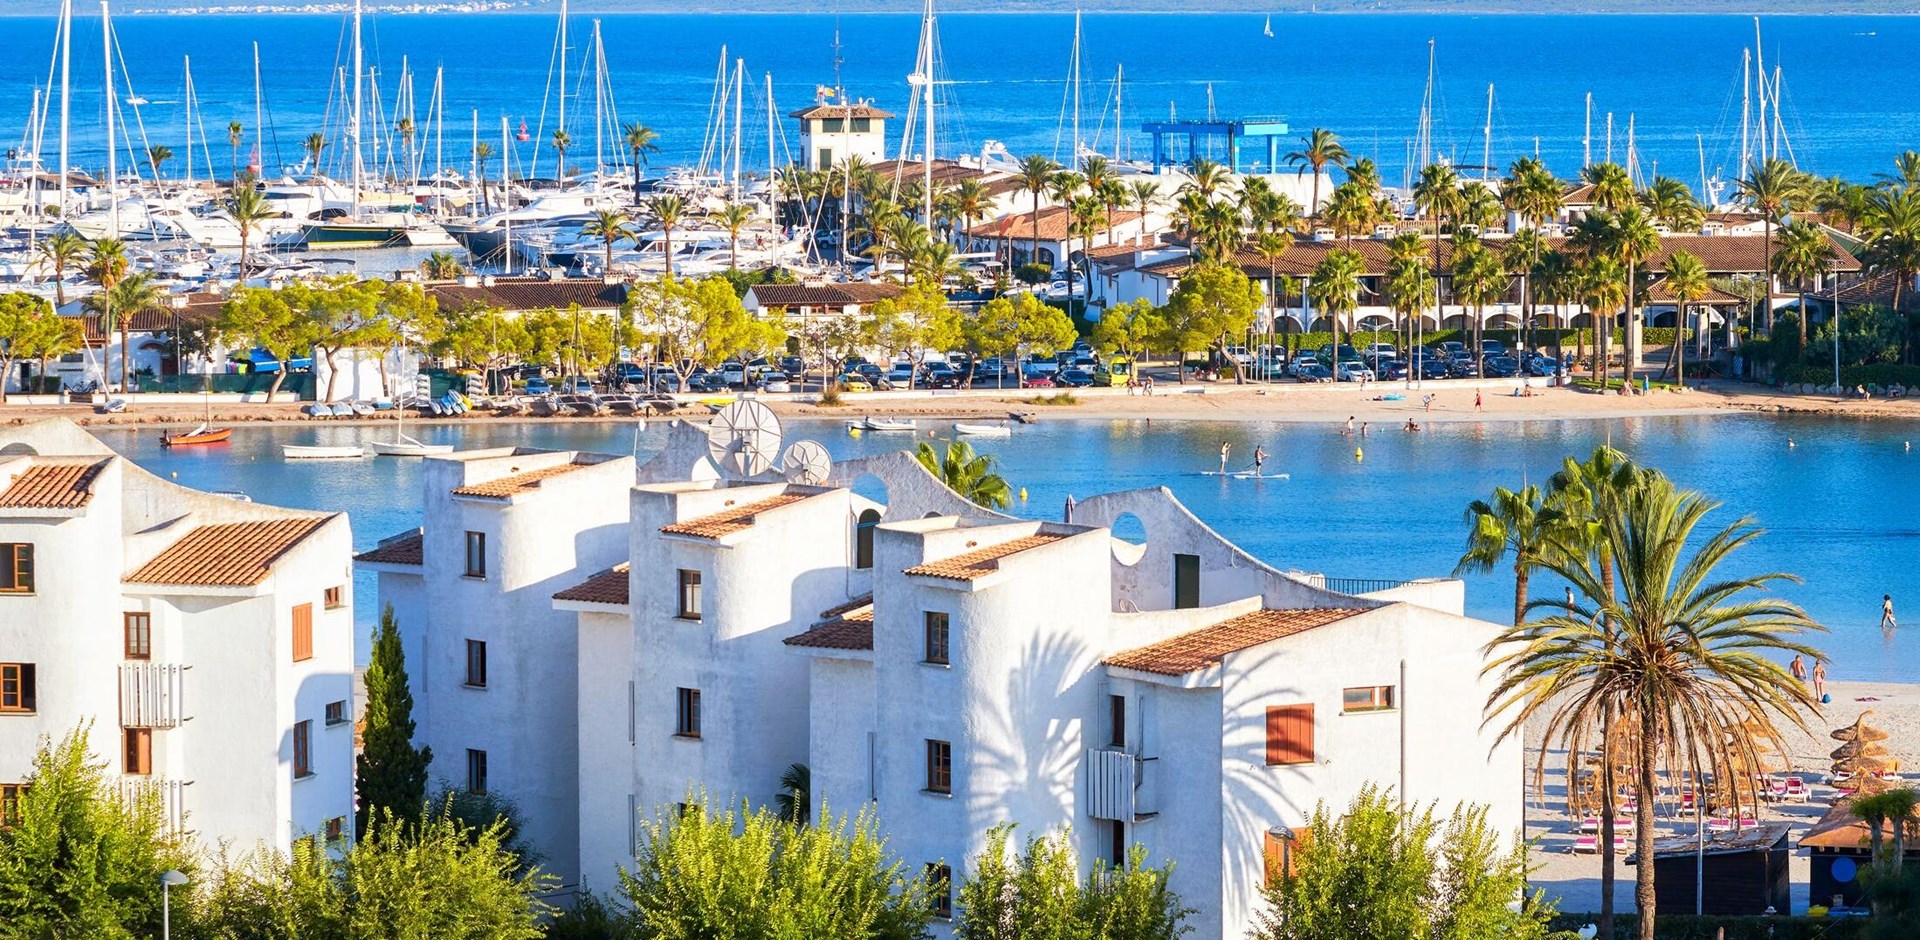 View of Alcudia, main tourist center in the North of Majorca on the eastern coast, Spain.